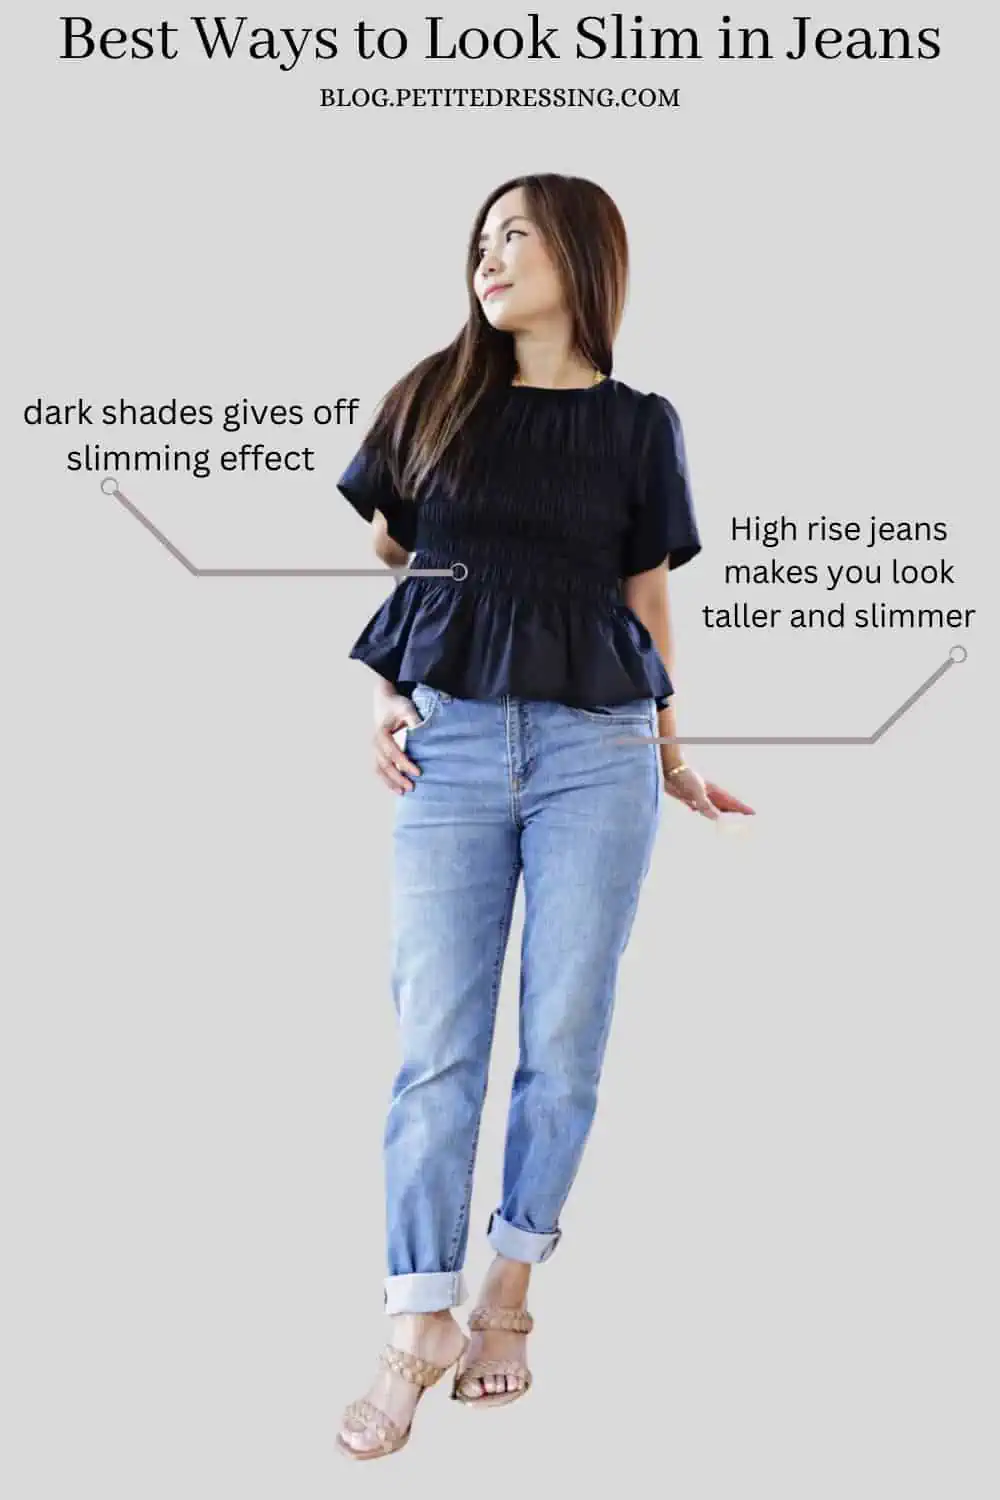 Want To Look Slim In Jeans? Try These Simple Style Hacks